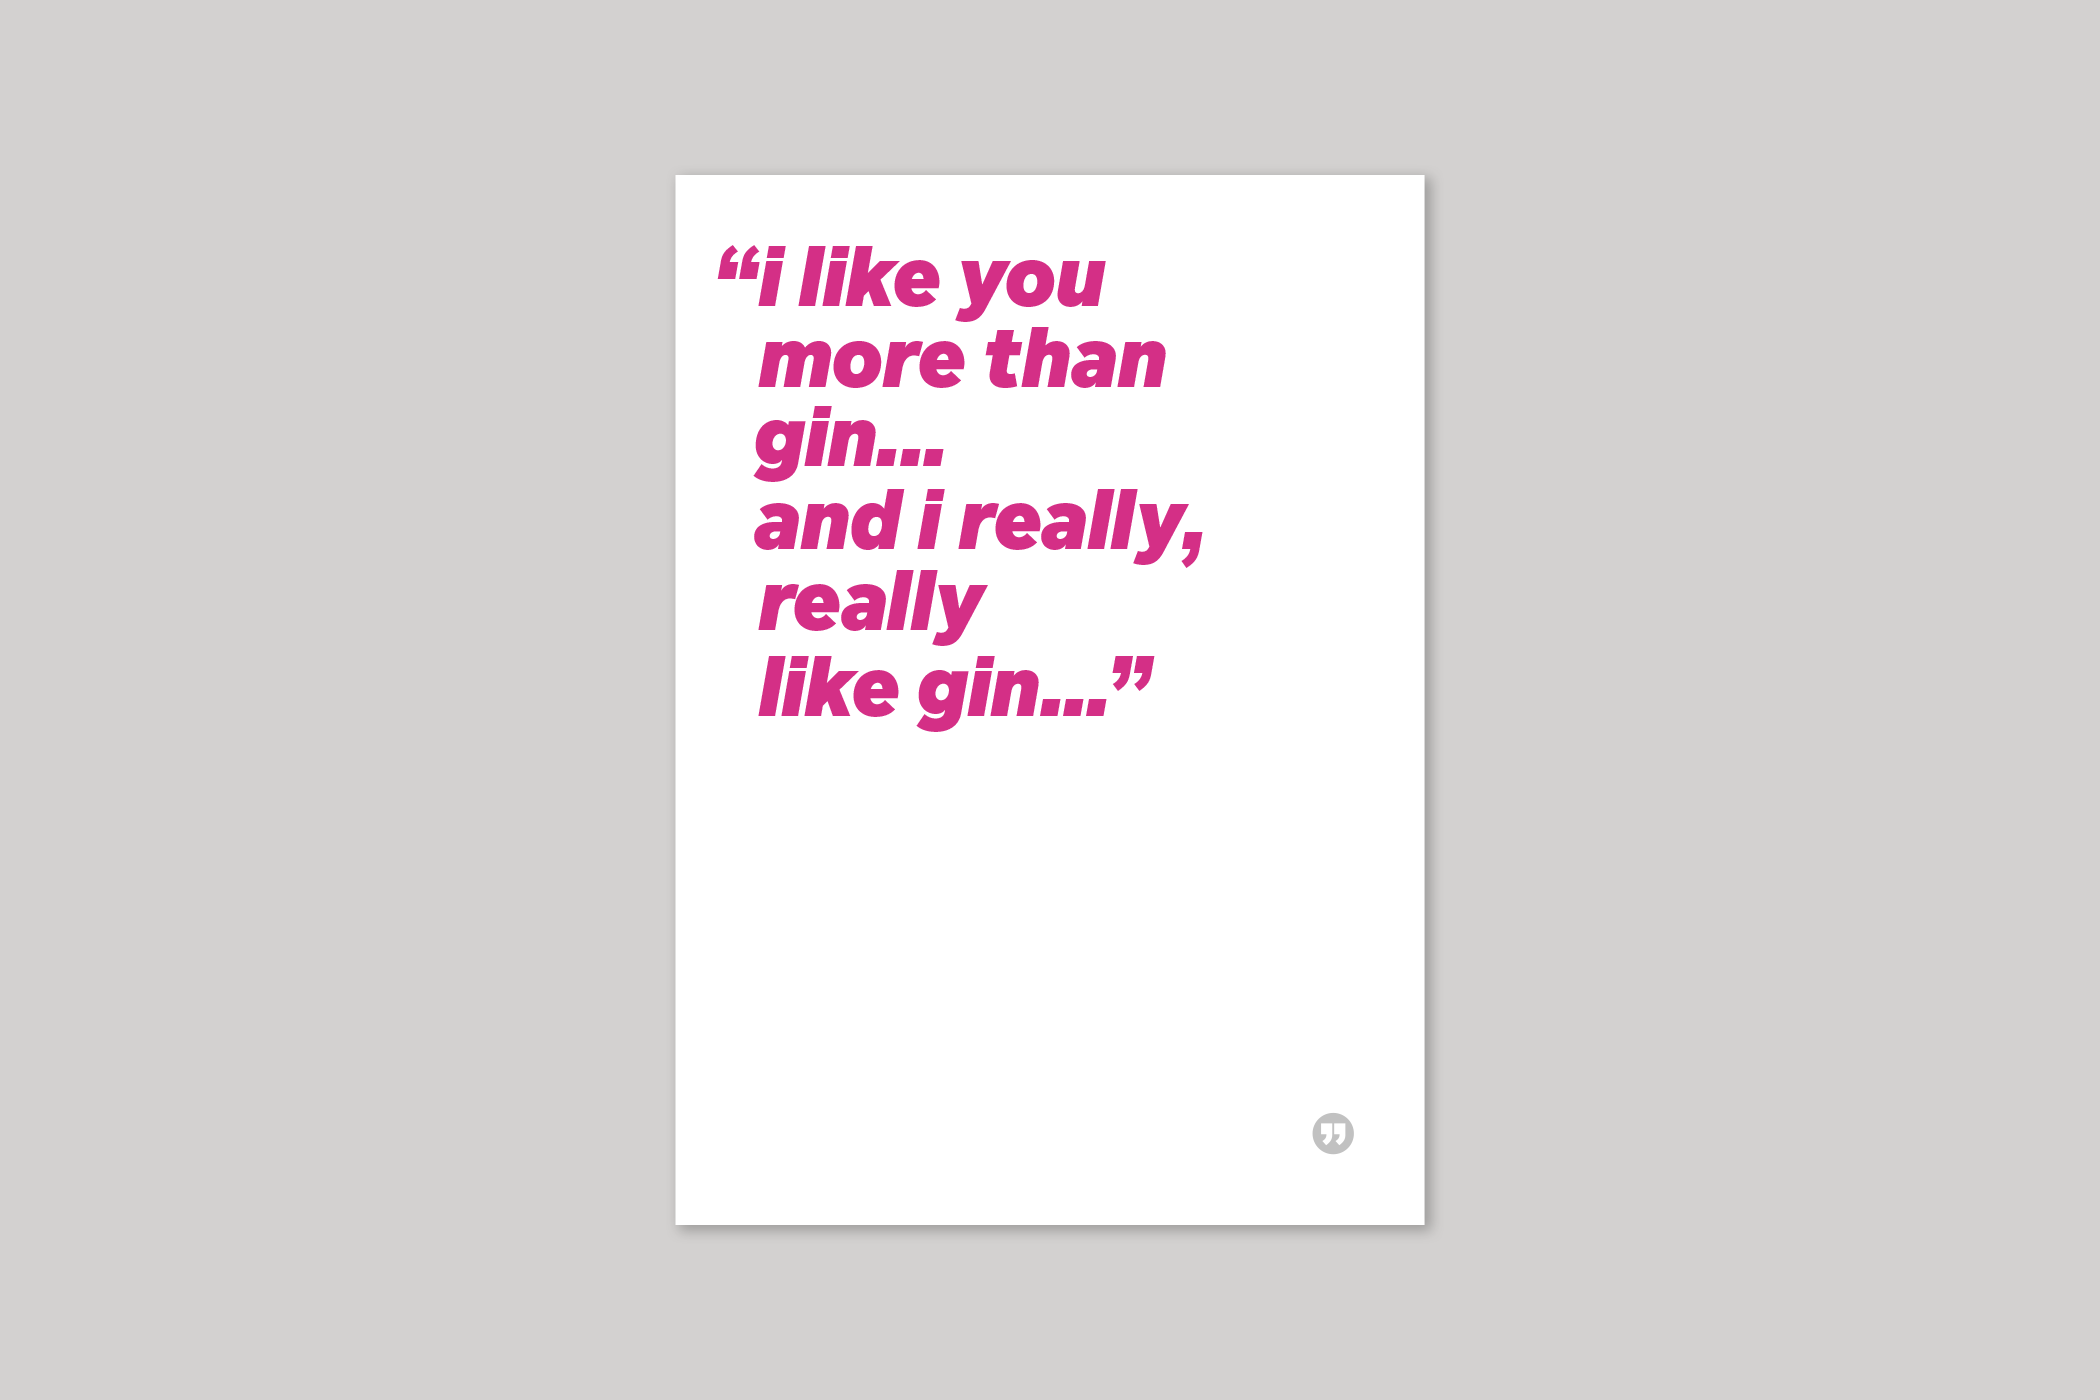 I Like You funny quotation from Quotecards range of cards by Icon.